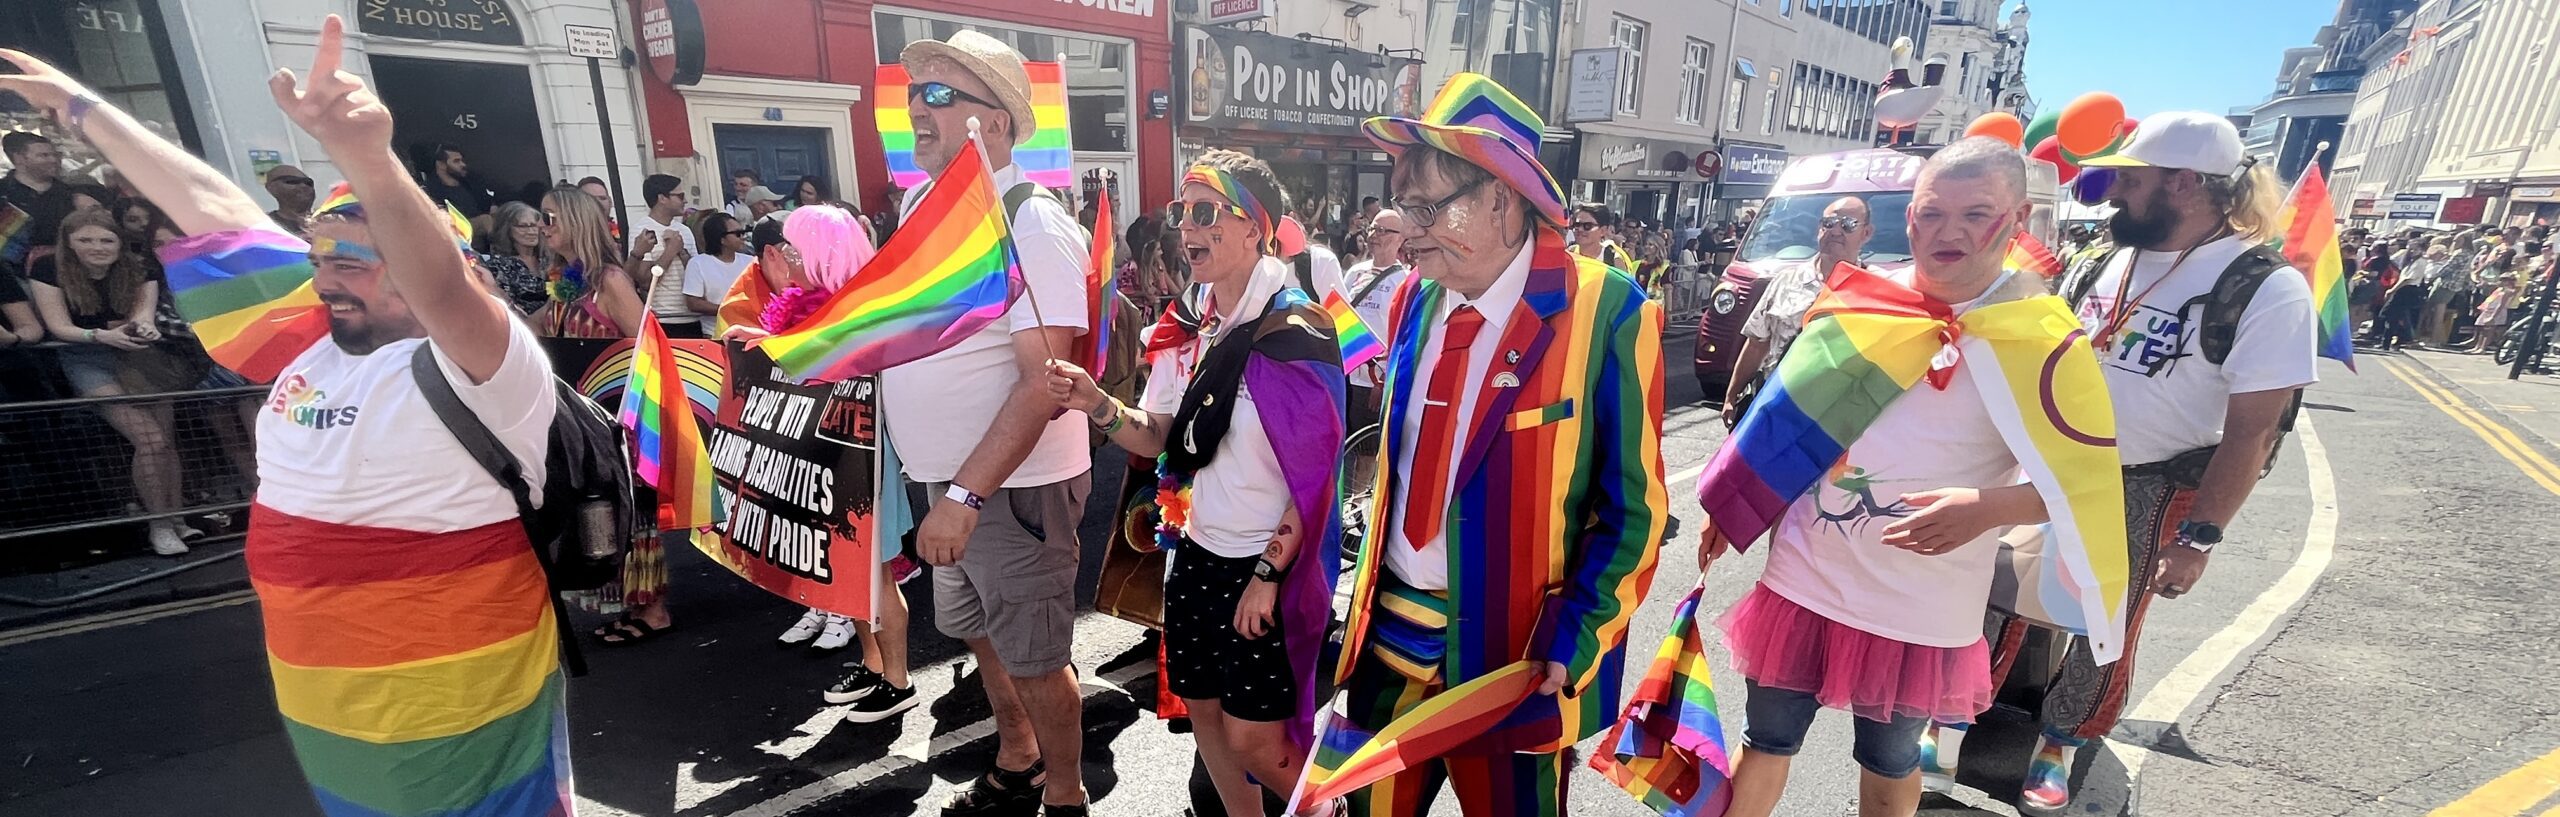 Image of people wearing rainbow flags and walking in a Pride Parade in Brighton